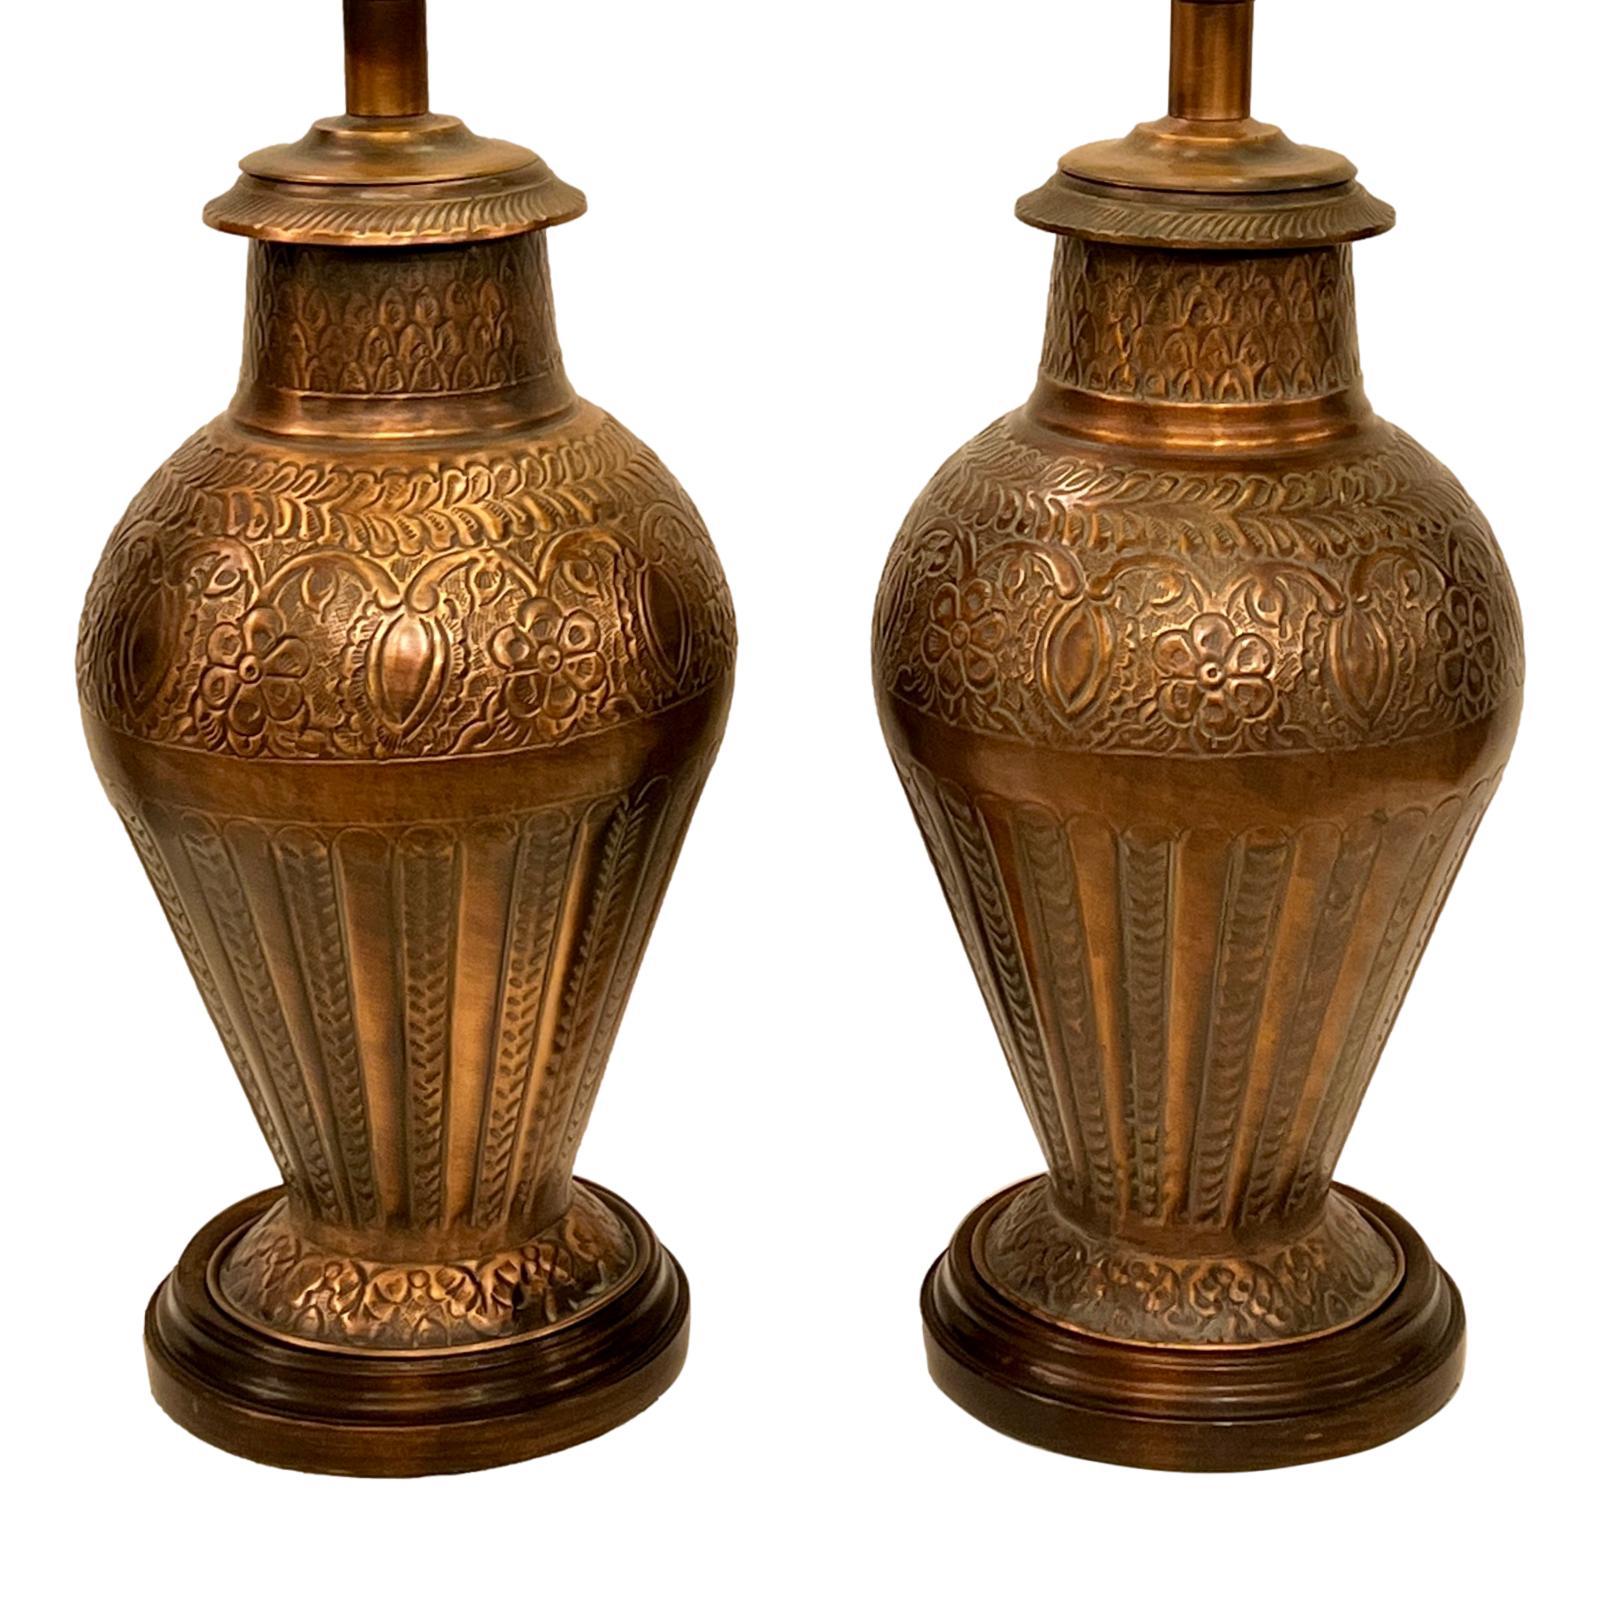 Pair of French circa 1950's hammered copper lamps.

Measurements:
Height: 17